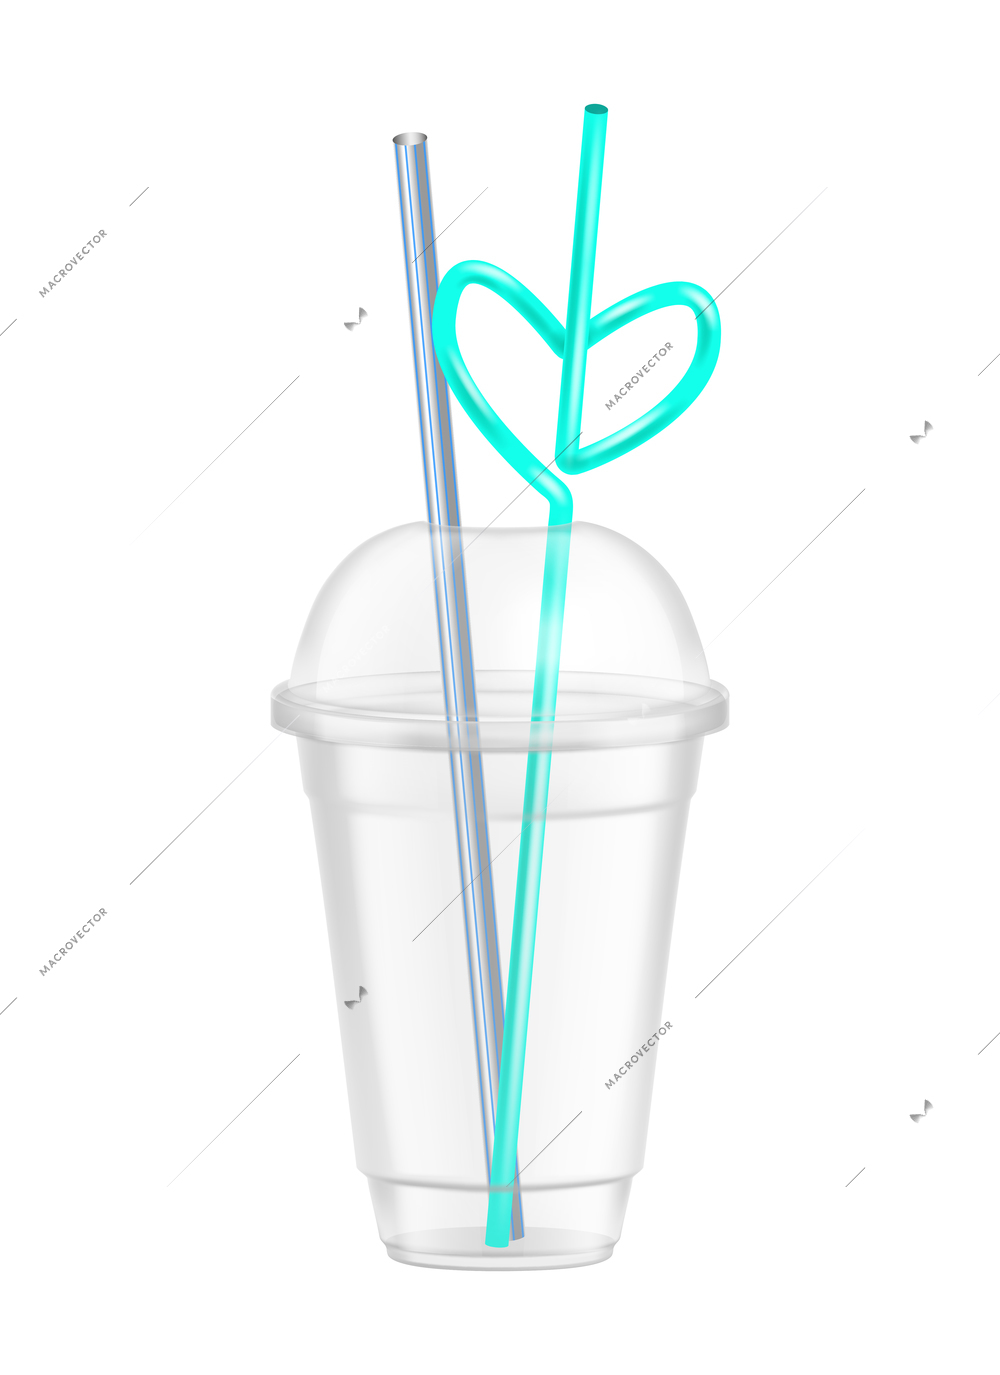 Transparent disposable plastic glass composition with isolated image of beverage container on blank background vector illustration